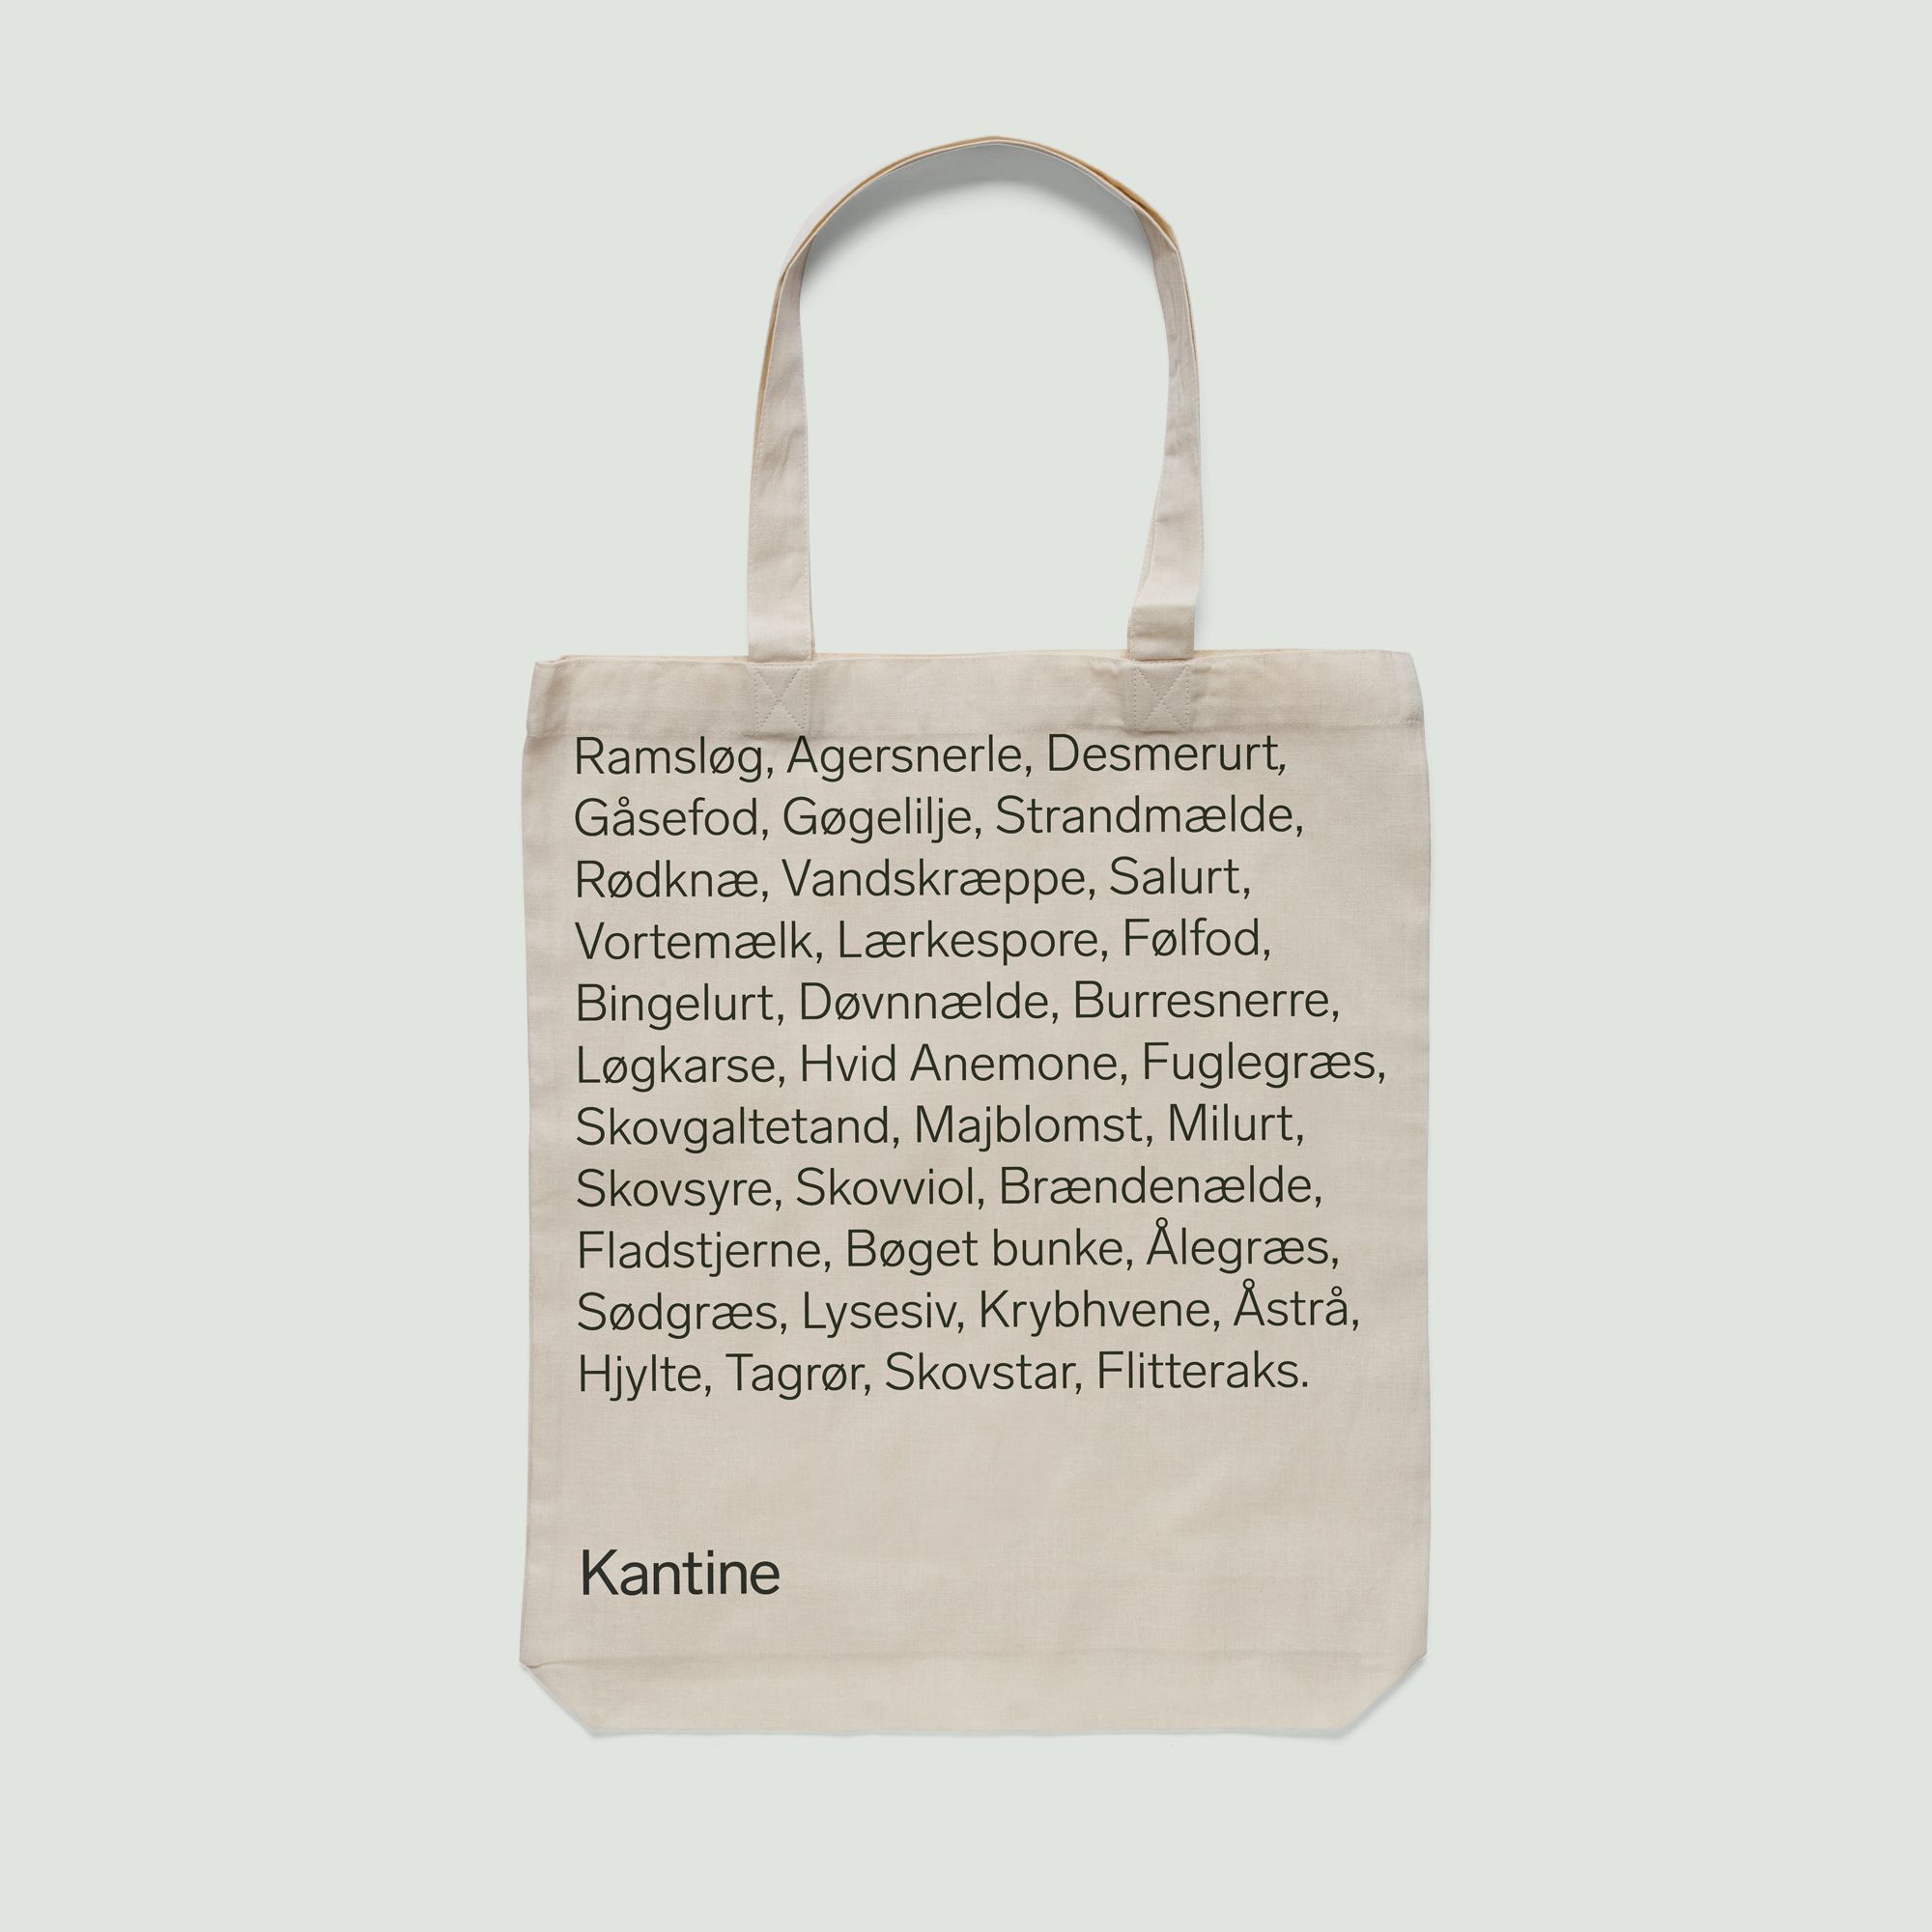 andreas_weiland_kantine_tote